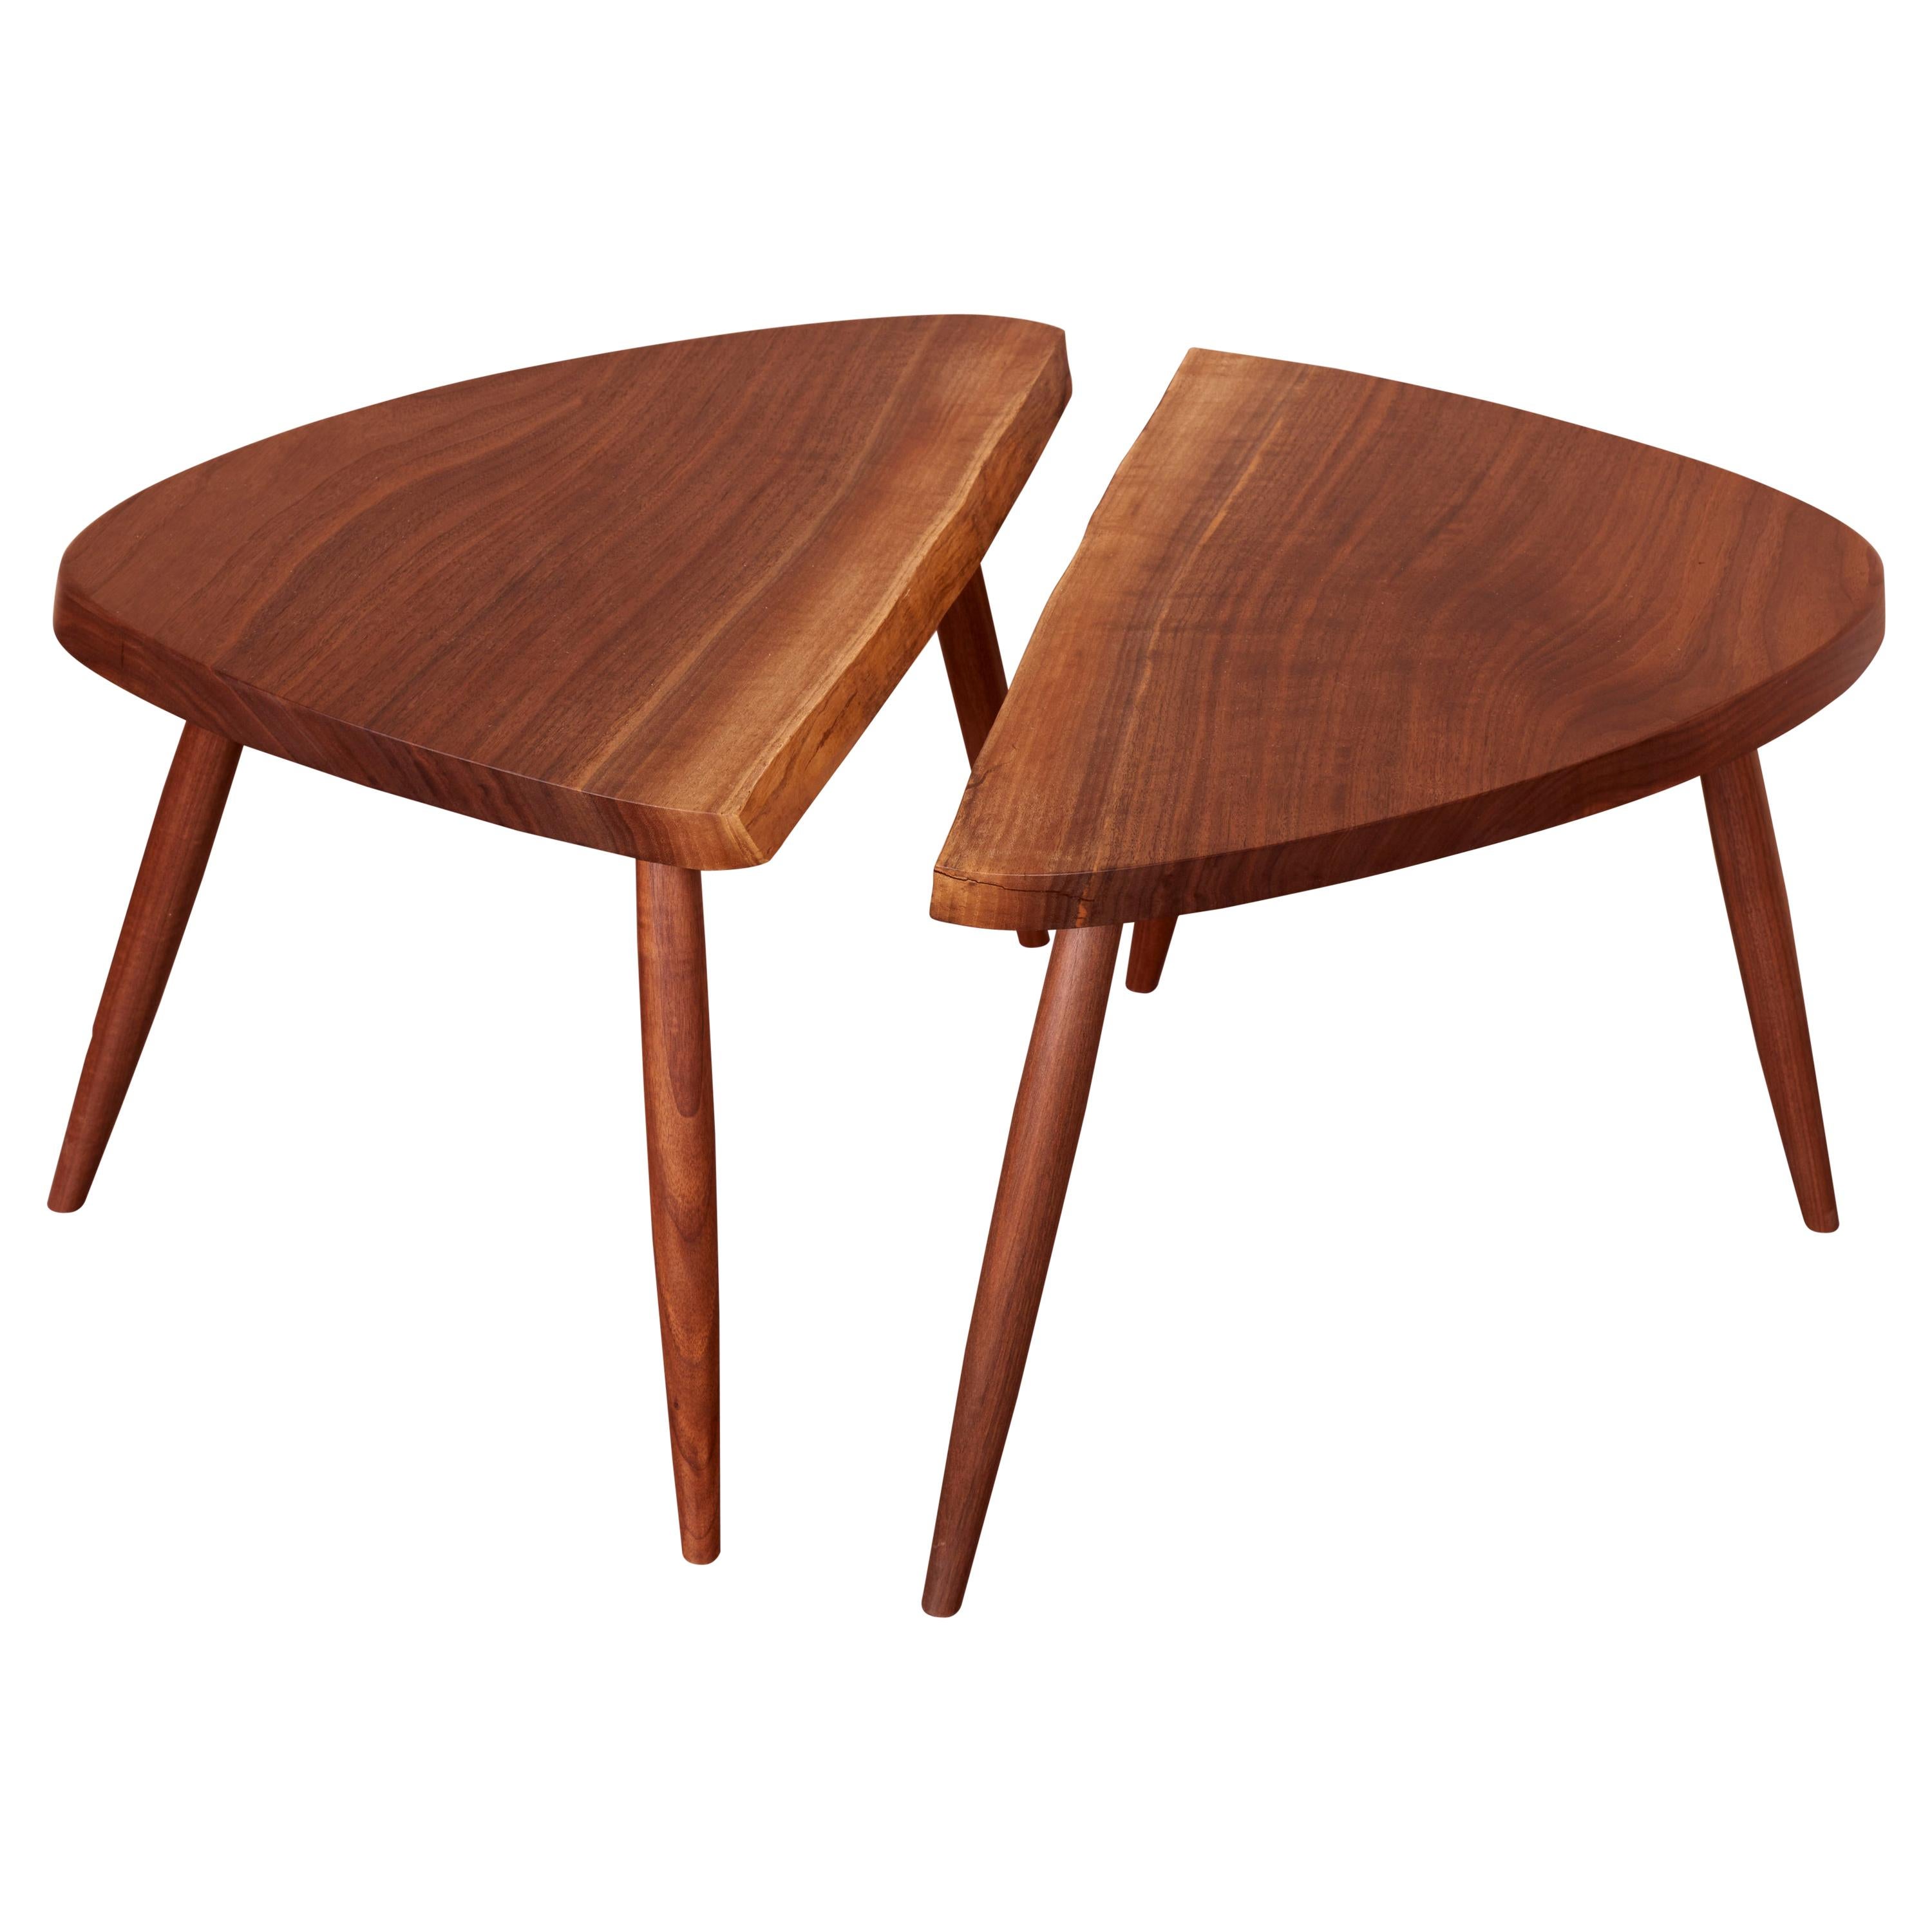 Pair of Mira Nakashima Wepman Side Tables based on a design by George Nakashima For Sale